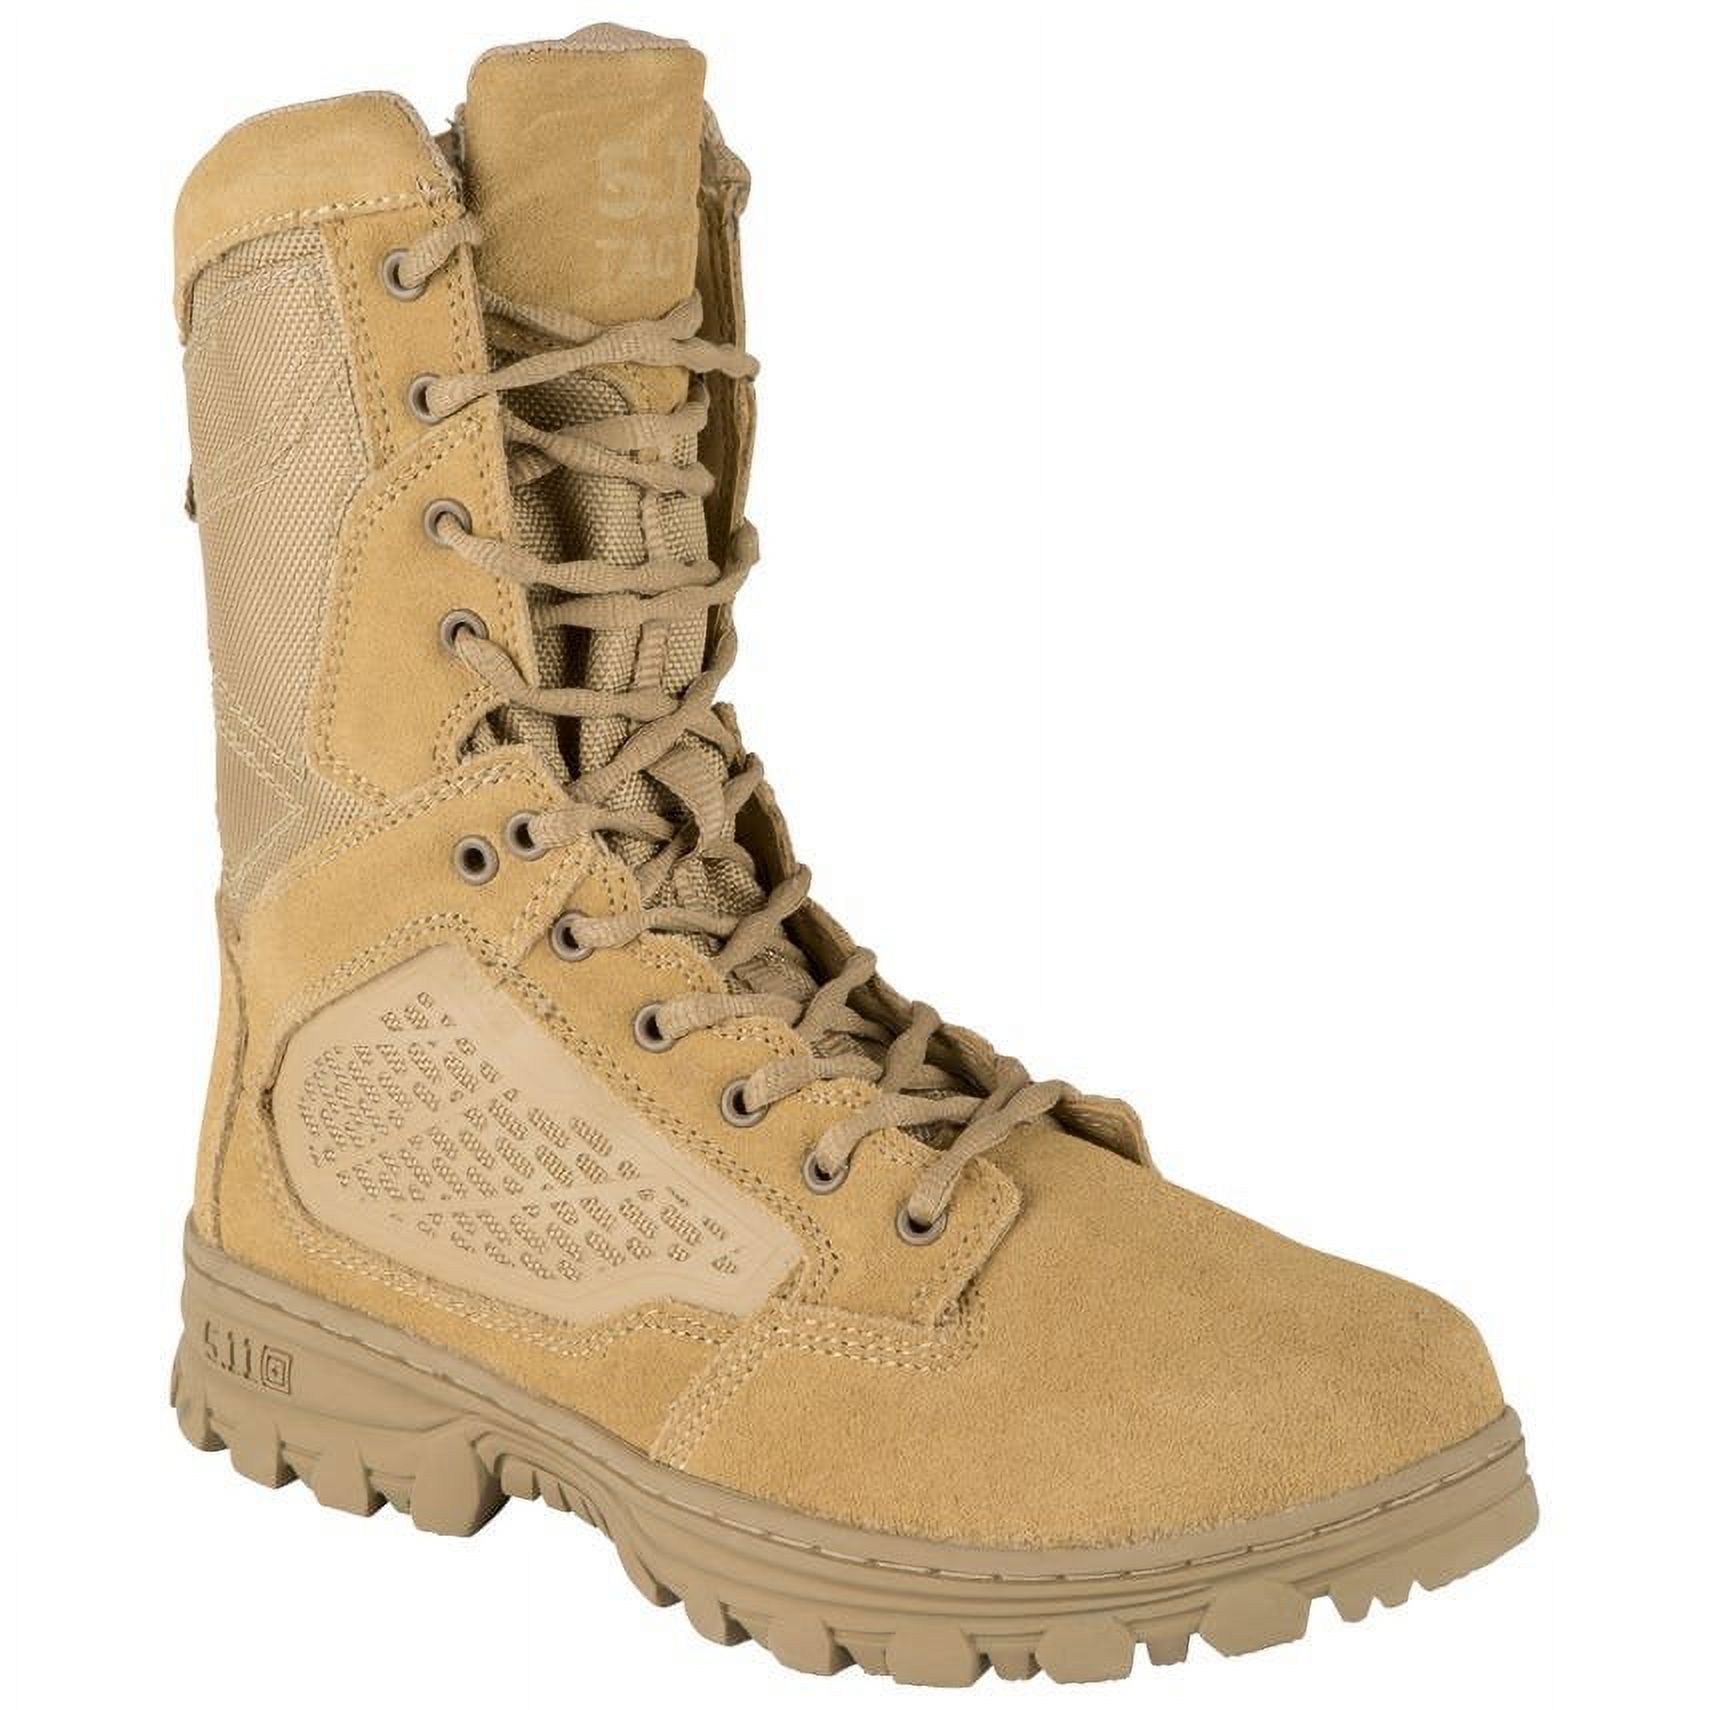 5.11 Work Gear EVO 8-Inch Waterproof Boots, Oil/Slip-Resistant, OrthoLite Insole, Coyote, 4/Regular, Style 12347 - image 1 of 4